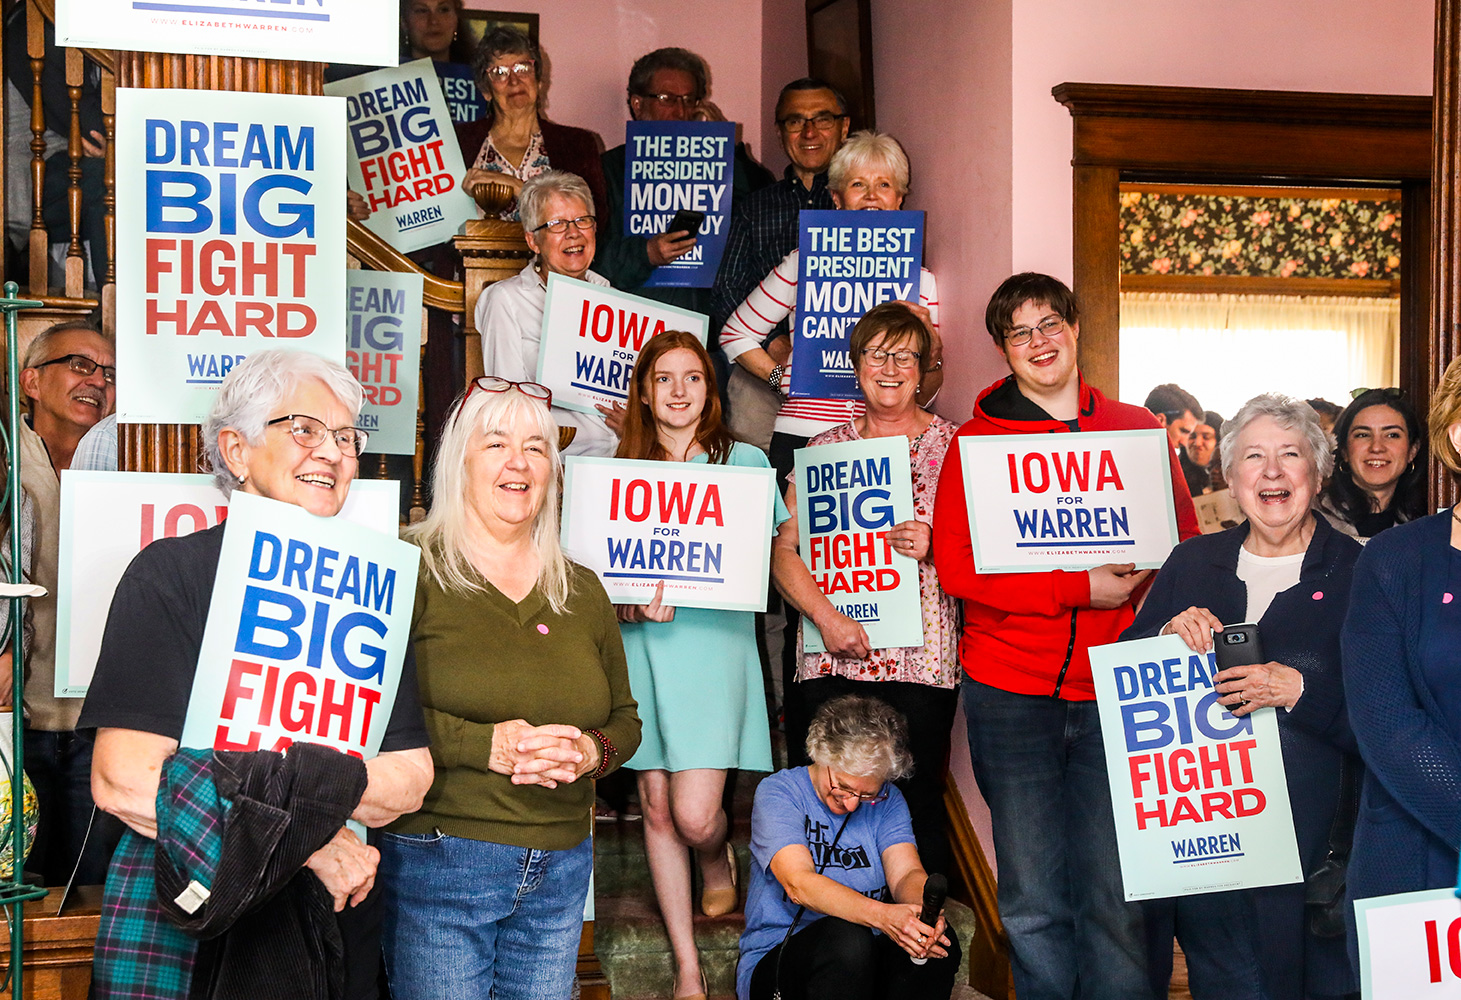 Supporters at a house party at River’s Bend Bed & Breakfast in Iowa Falls on May 3. (Krista Schlueter for TIME)